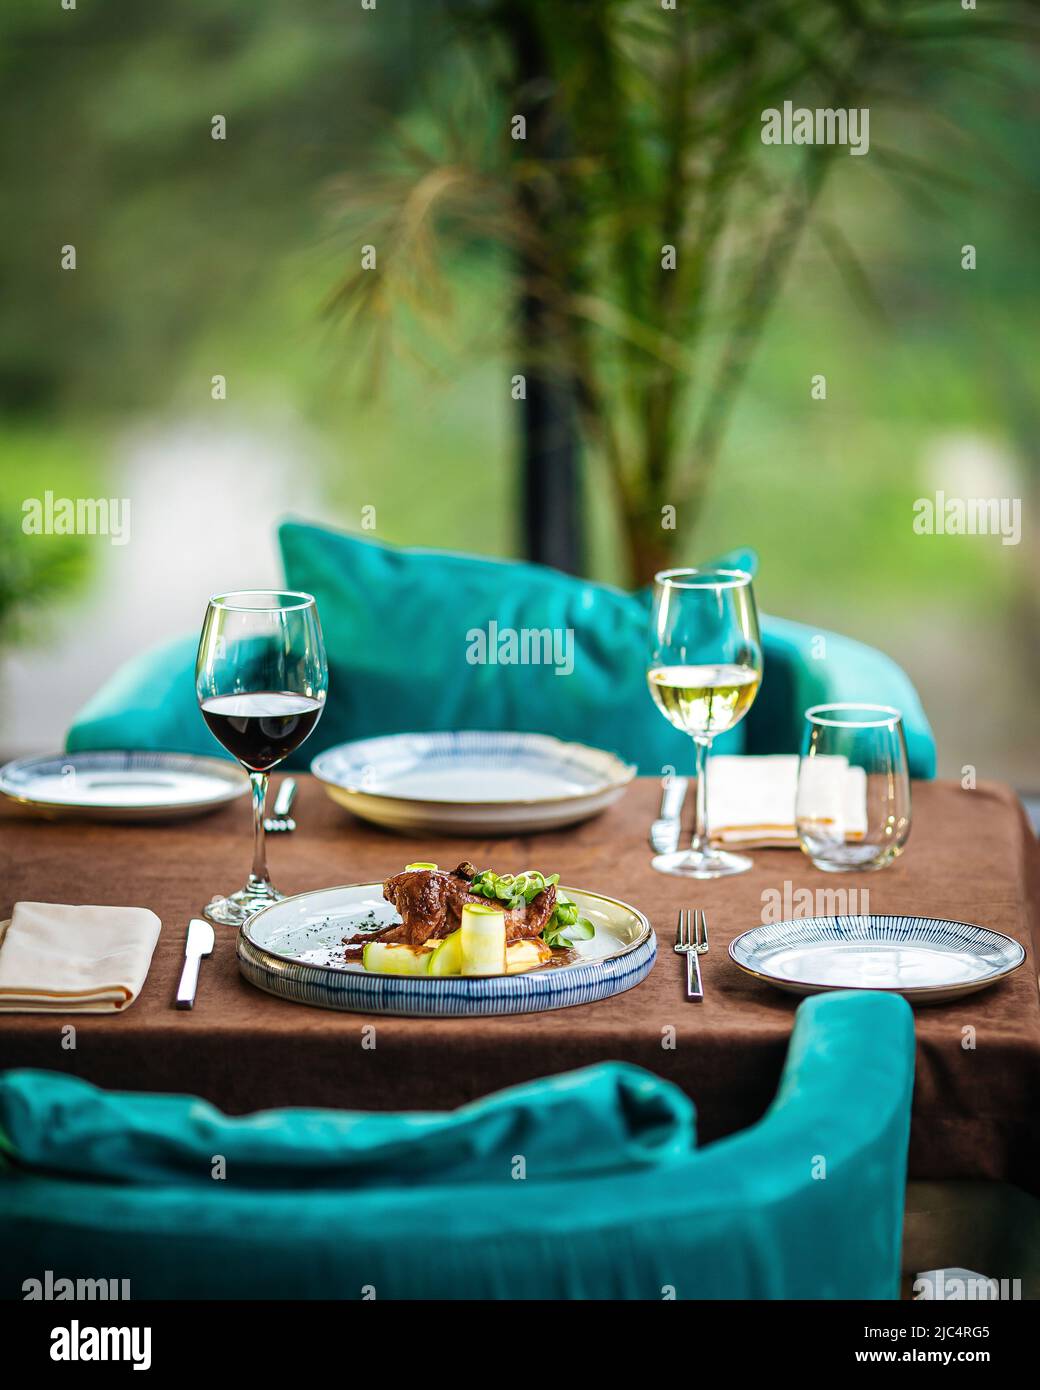 Served restaurant table with drinks and food Stock Photo